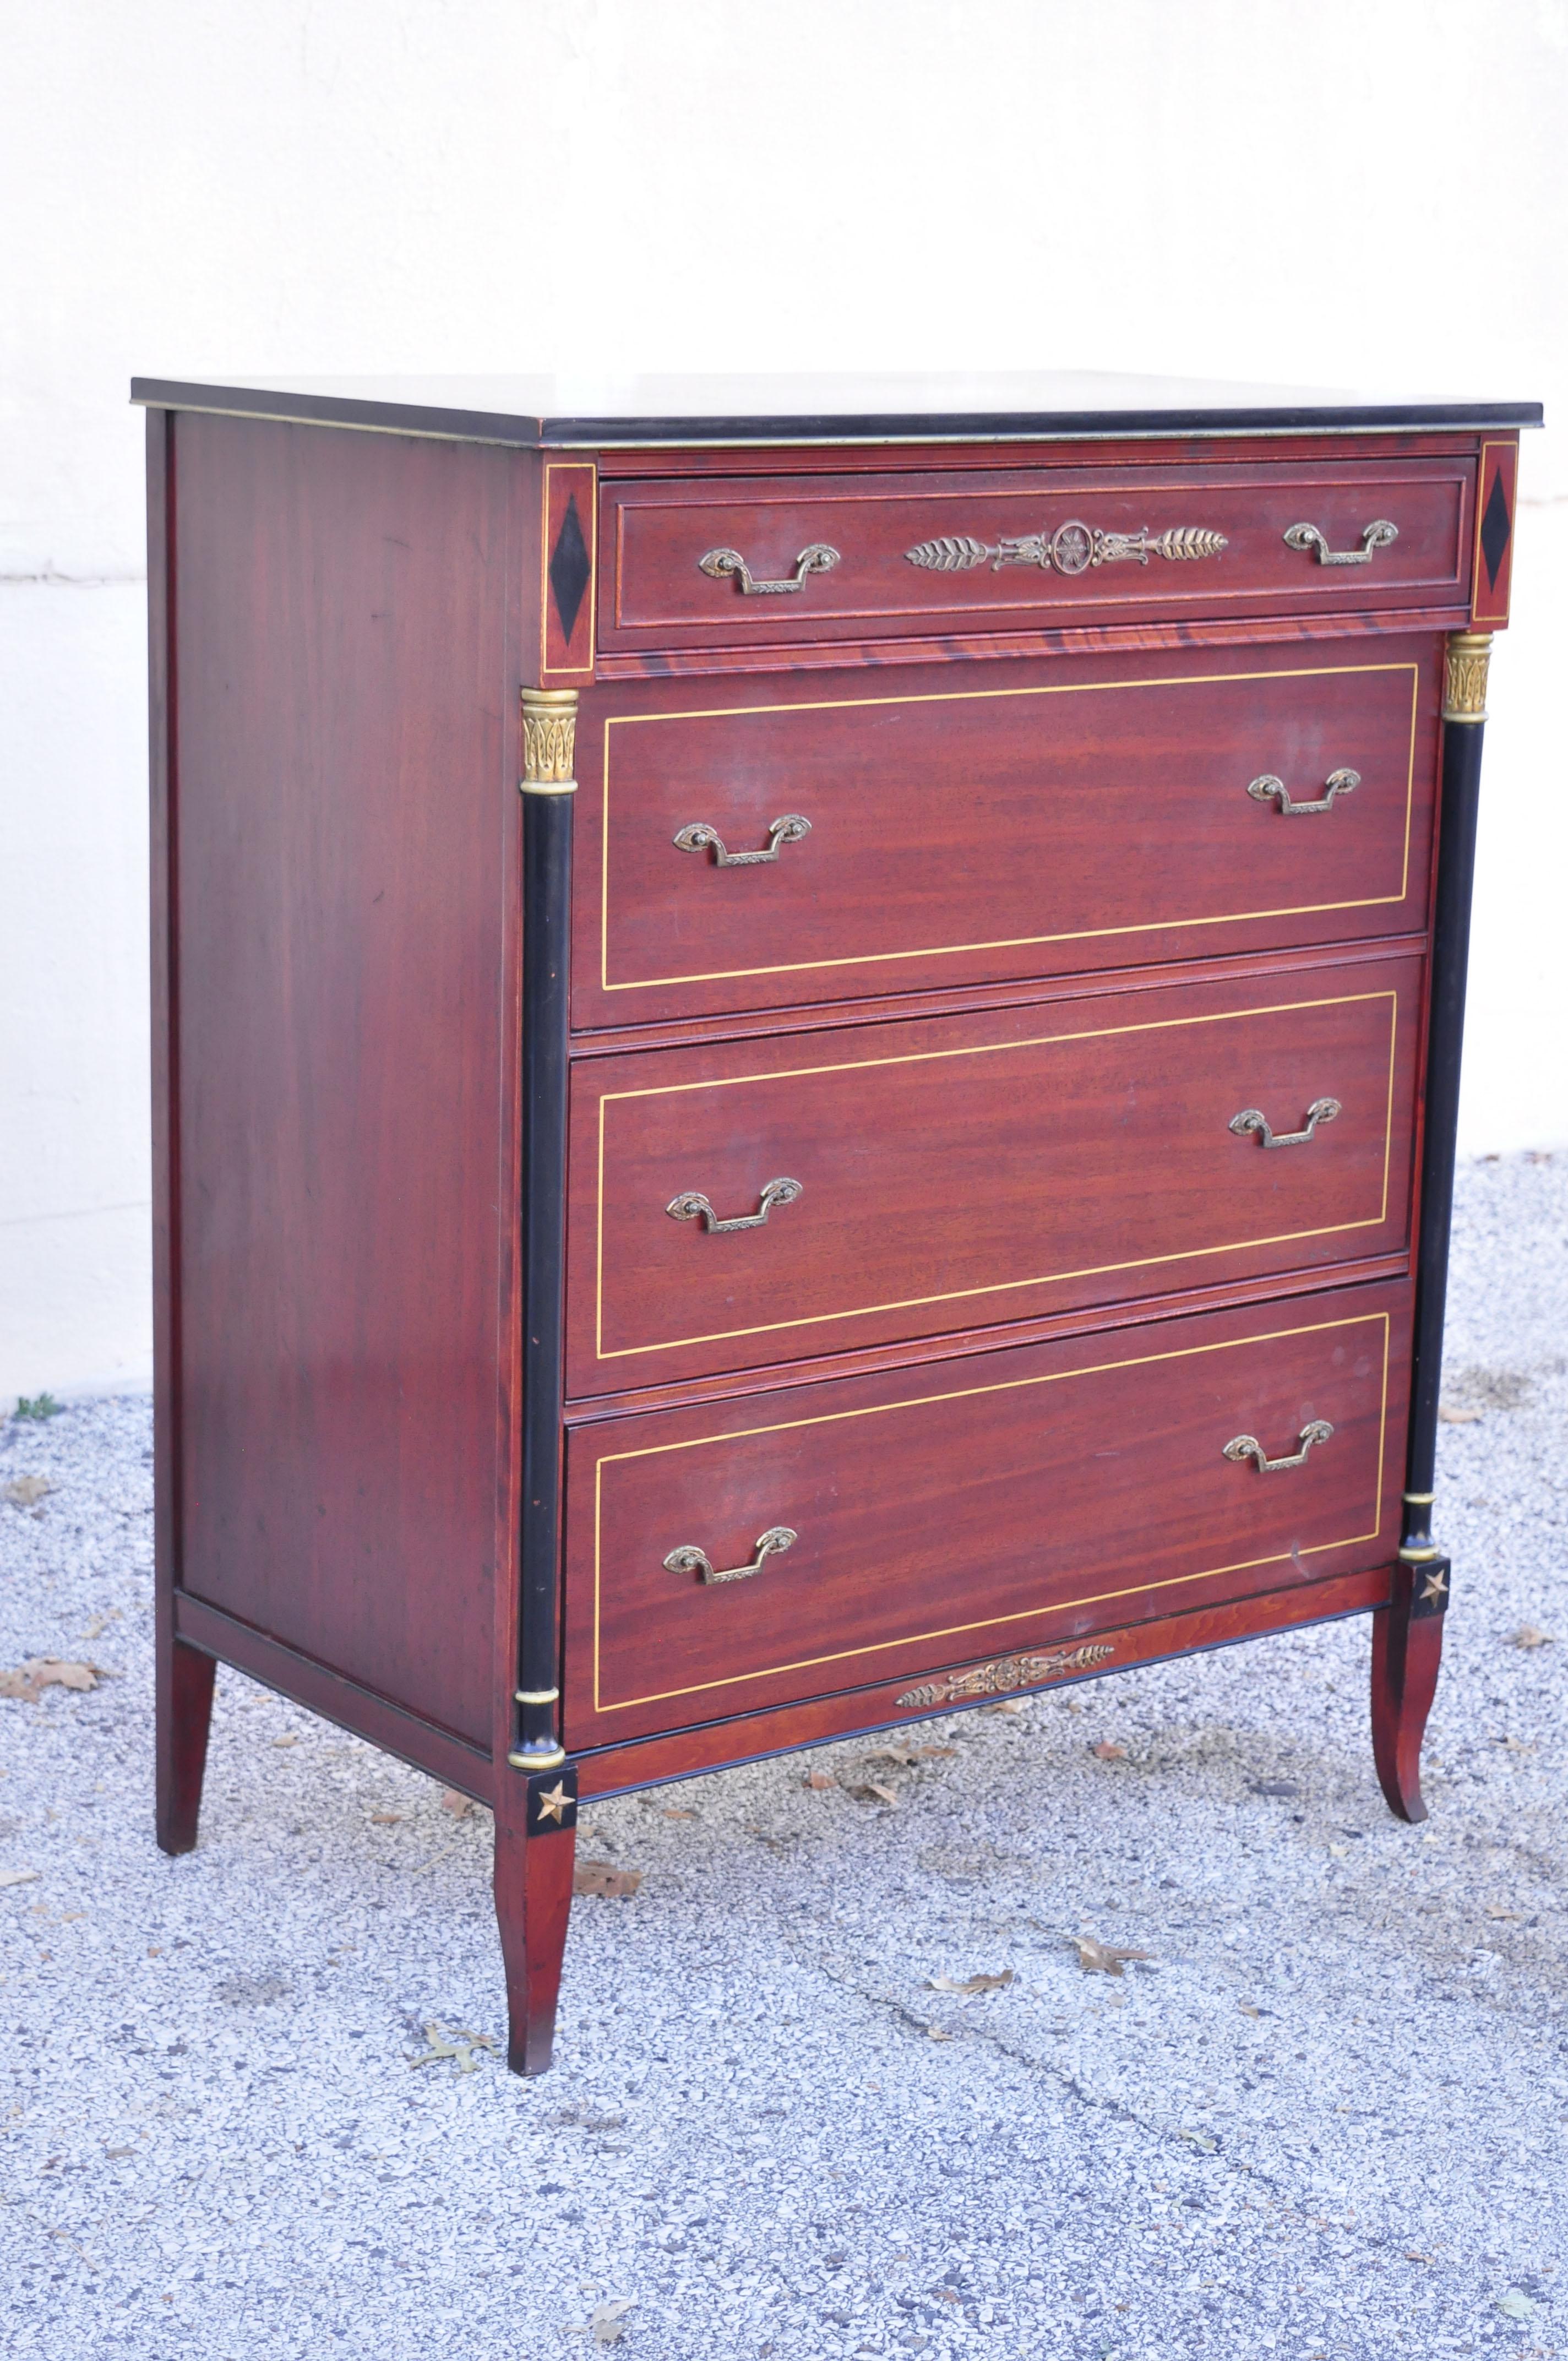 Antique Rway French Empire neoclassical style mahogany 4 drawer tall chest dresser highboy. Item features beautiful wood grain, original label, 4 dovetailed shapely saber legs, solid brass hardware, very nice antique item, quality American